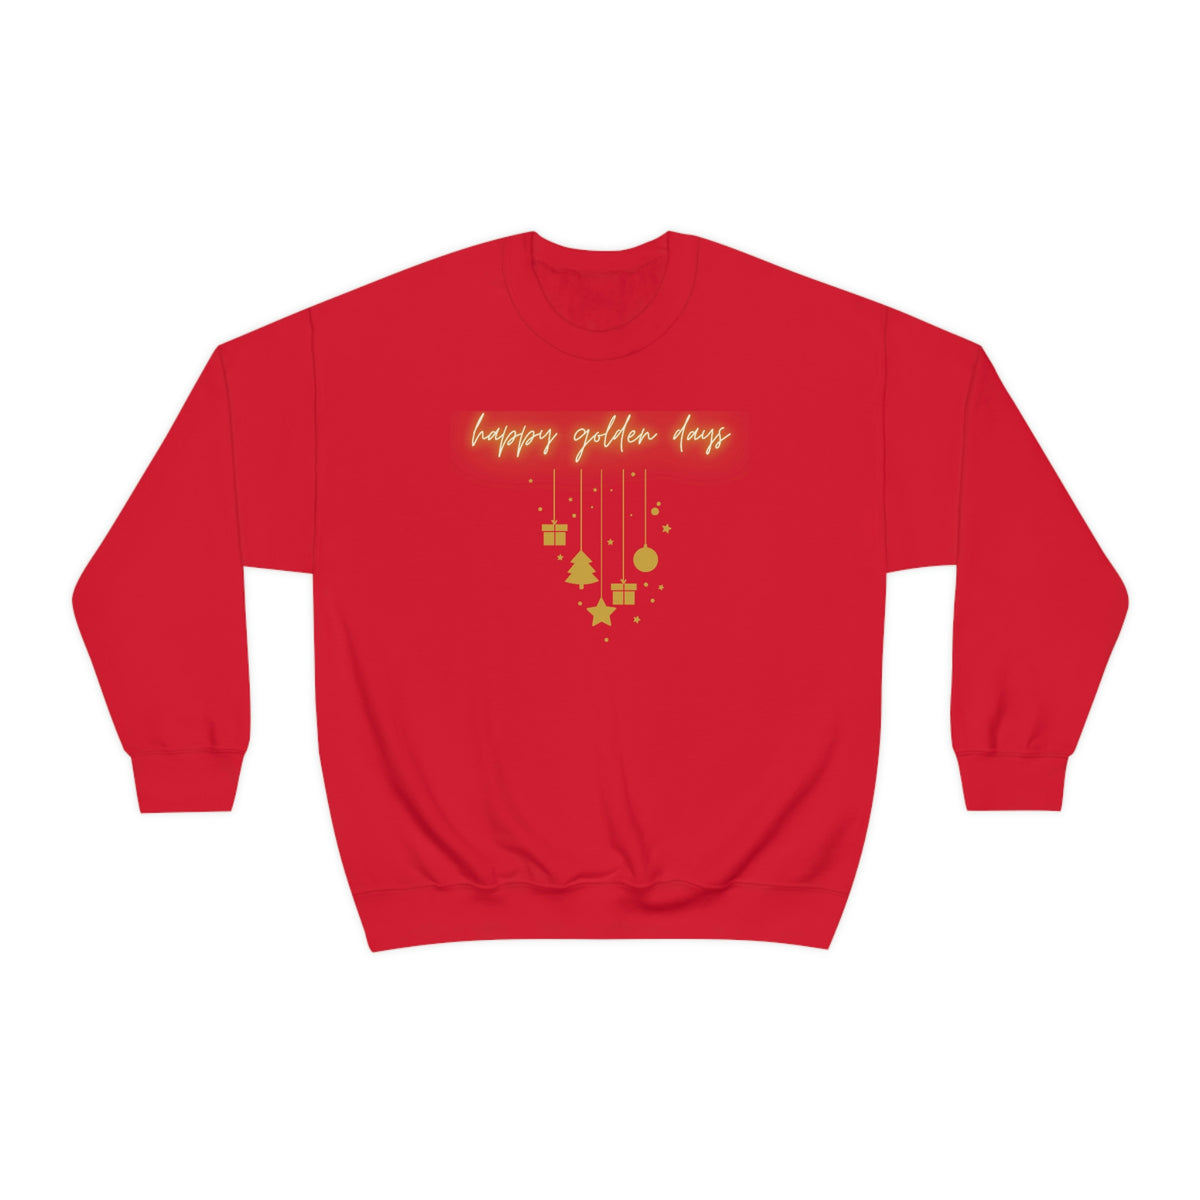 Have yourself a merry little Christmas shirt, Christmas crewneck, Christmas sweatshirt, Holiday crewneck, Christmas song shirt, Ugly sweater